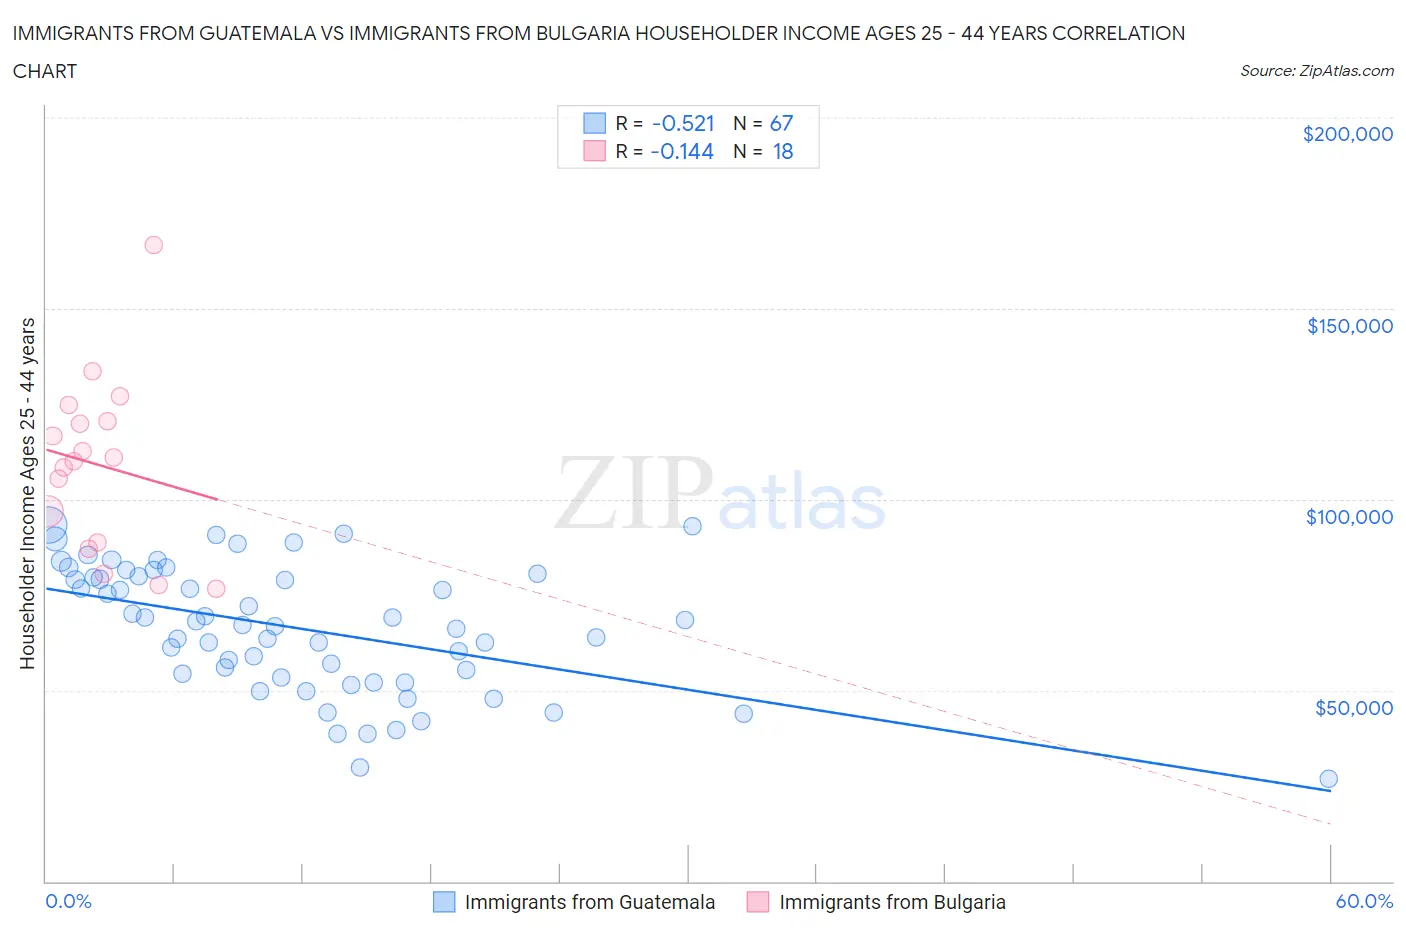 Immigrants from Guatemala vs Immigrants from Bulgaria Householder Income Ages 25 - 44 years